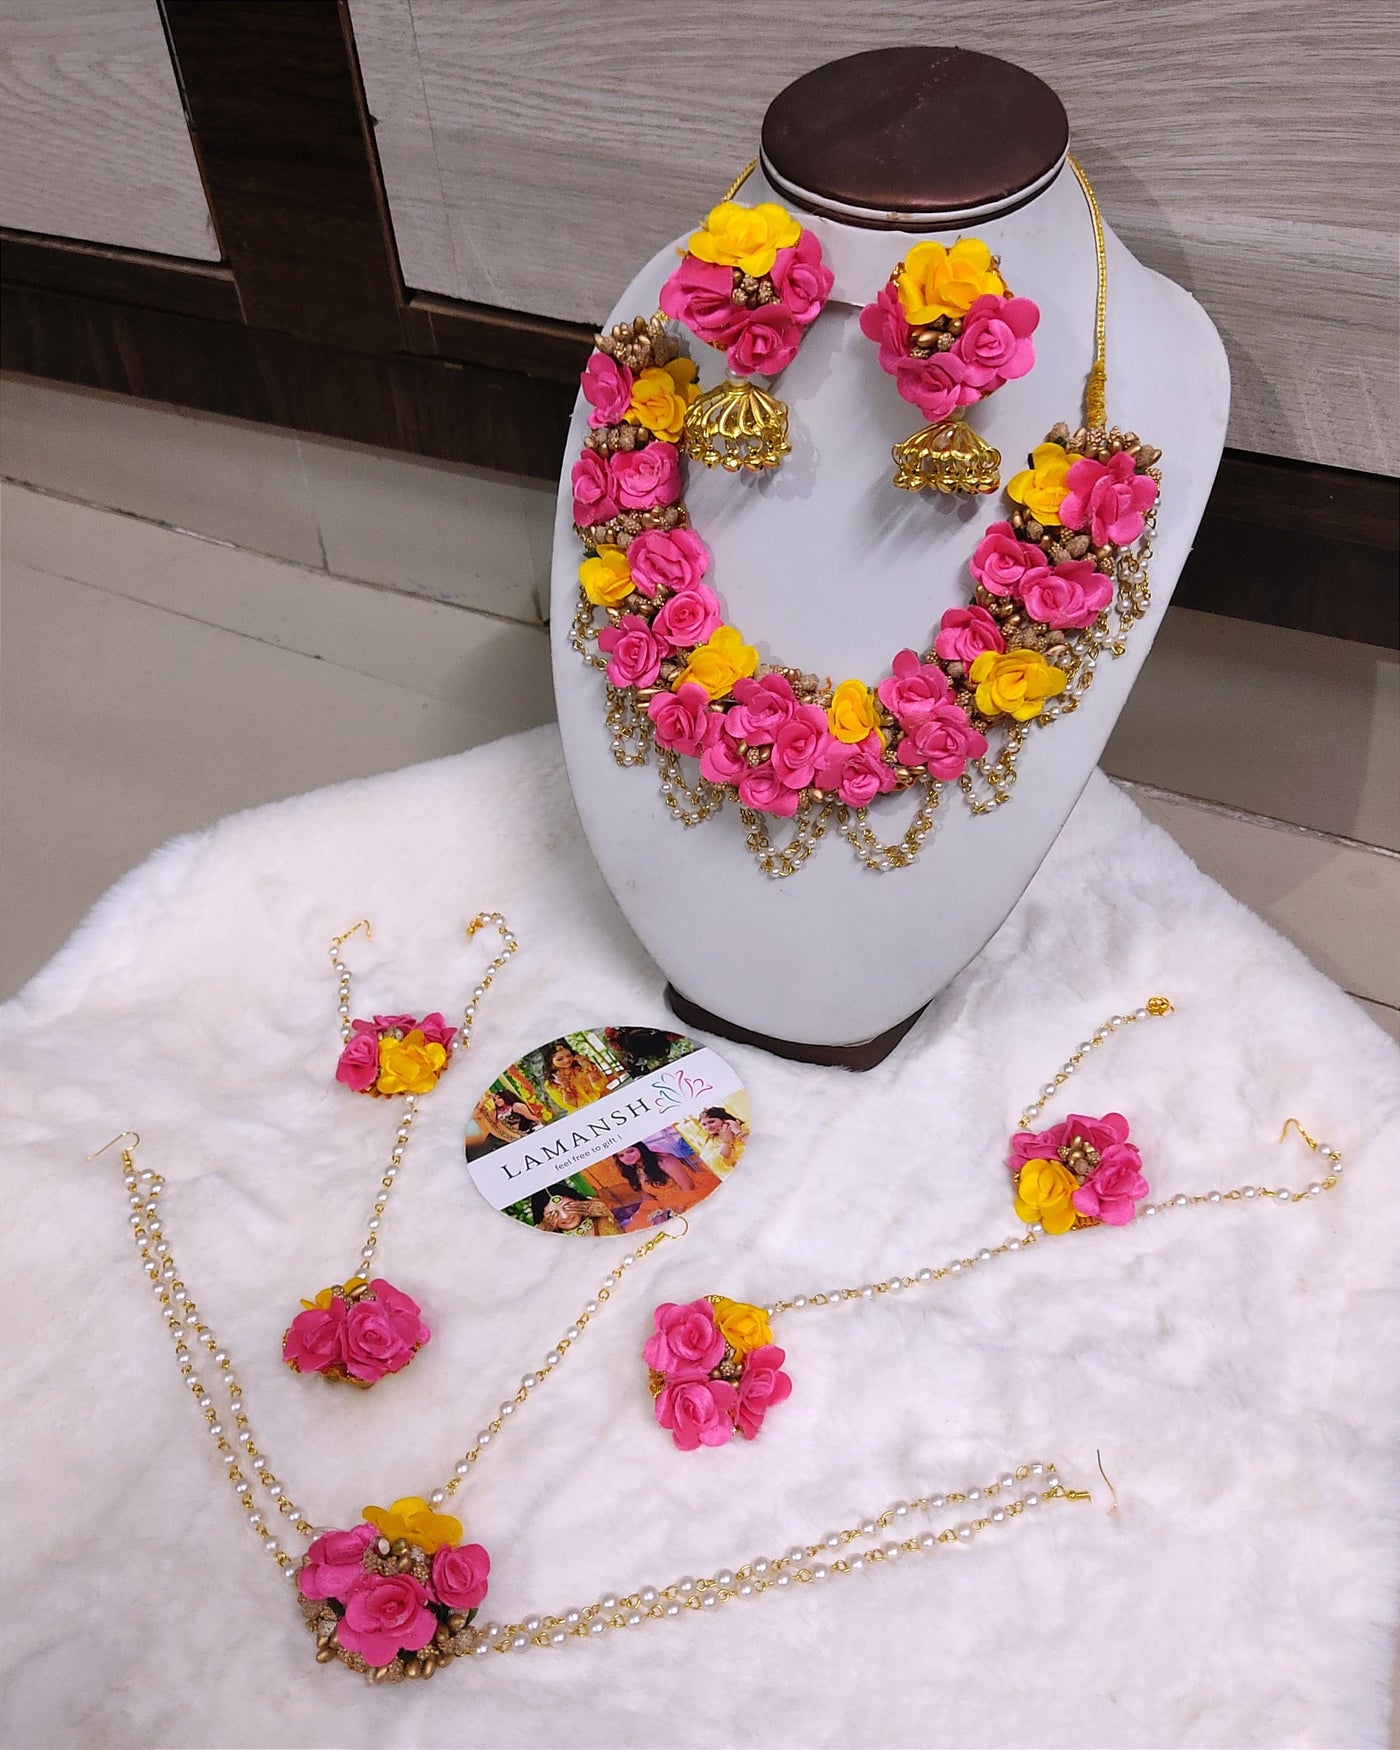 Lamansh Flower Jewellery 1 Necklace, 2 Jhumki Earrings , 1 Maangtika with side chain , 2 Bracelets attached to ring / Pink-Yellow LAMANSH® Bridal Artificial Floral 💗 Jewellery Set| Fabric Flower Jewelry set